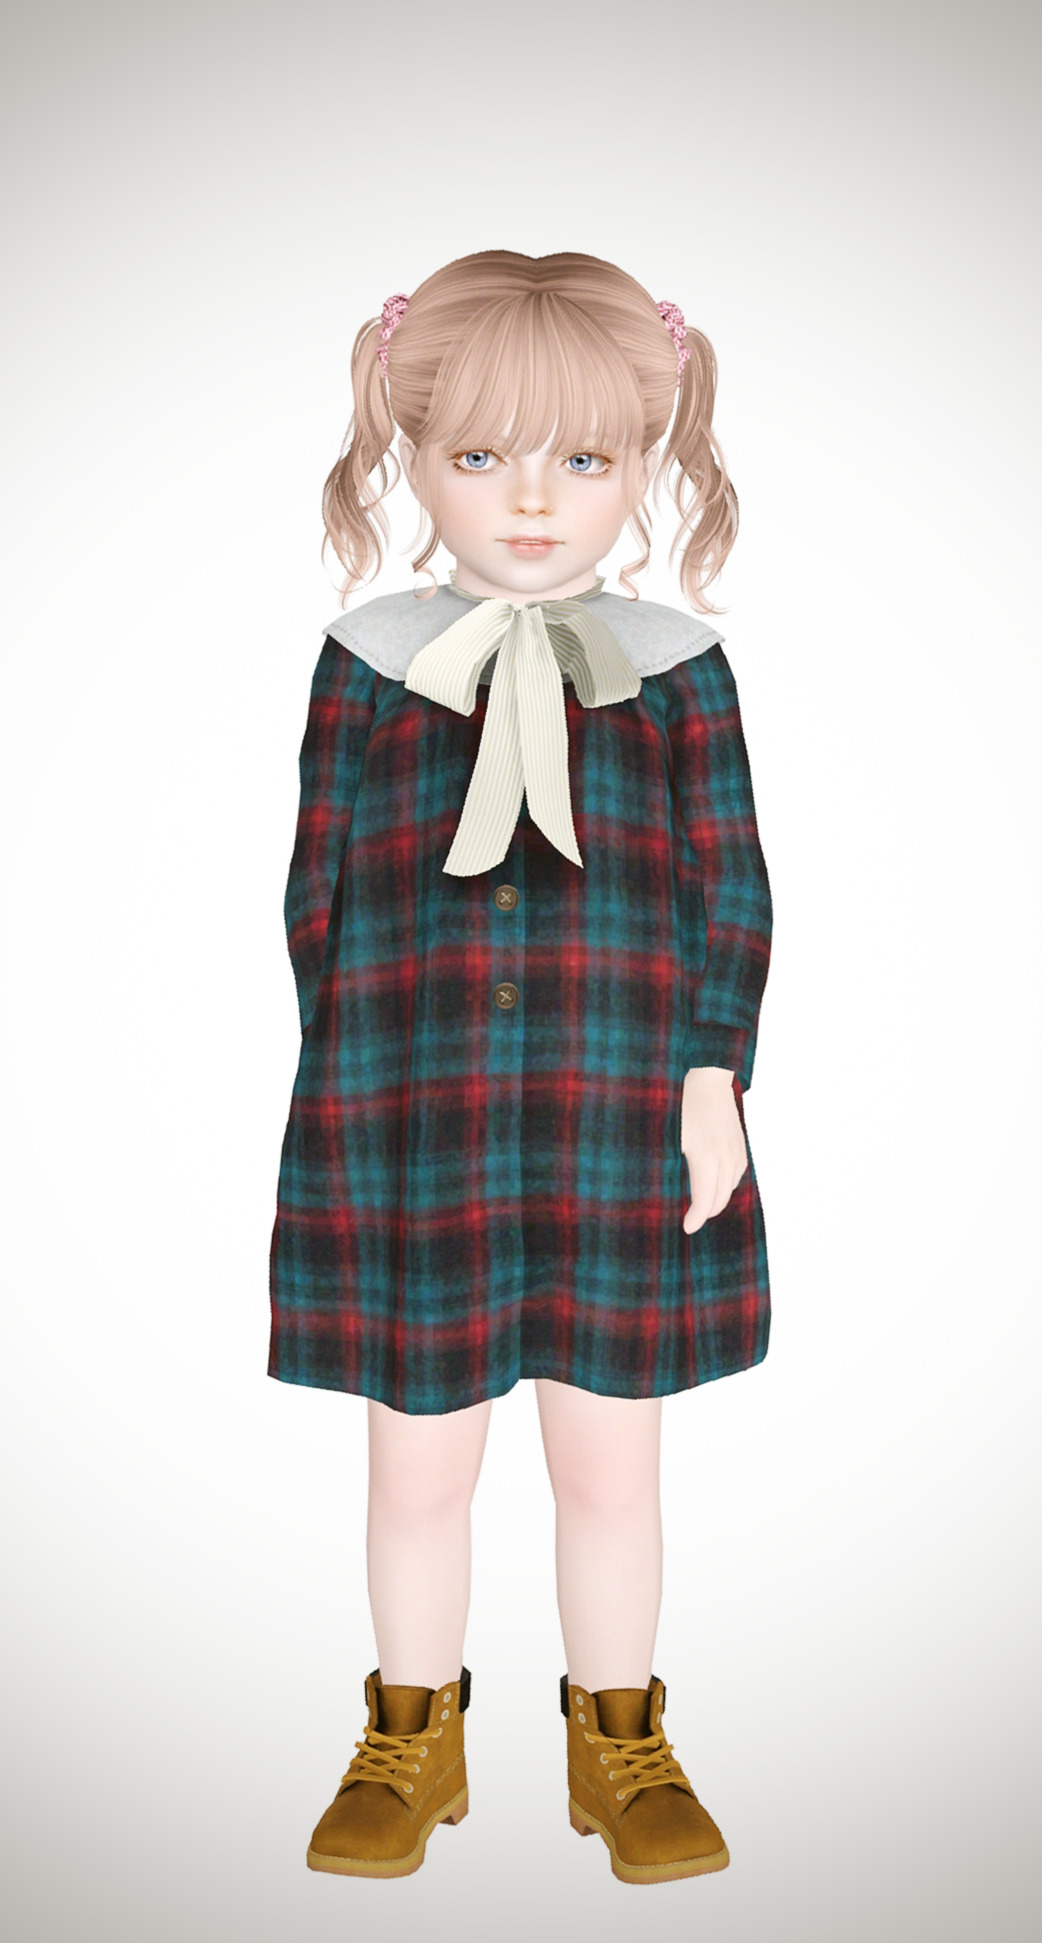 anzuchansims: [ TS4 to TS3 ] Toddler... - Emily CC Finds